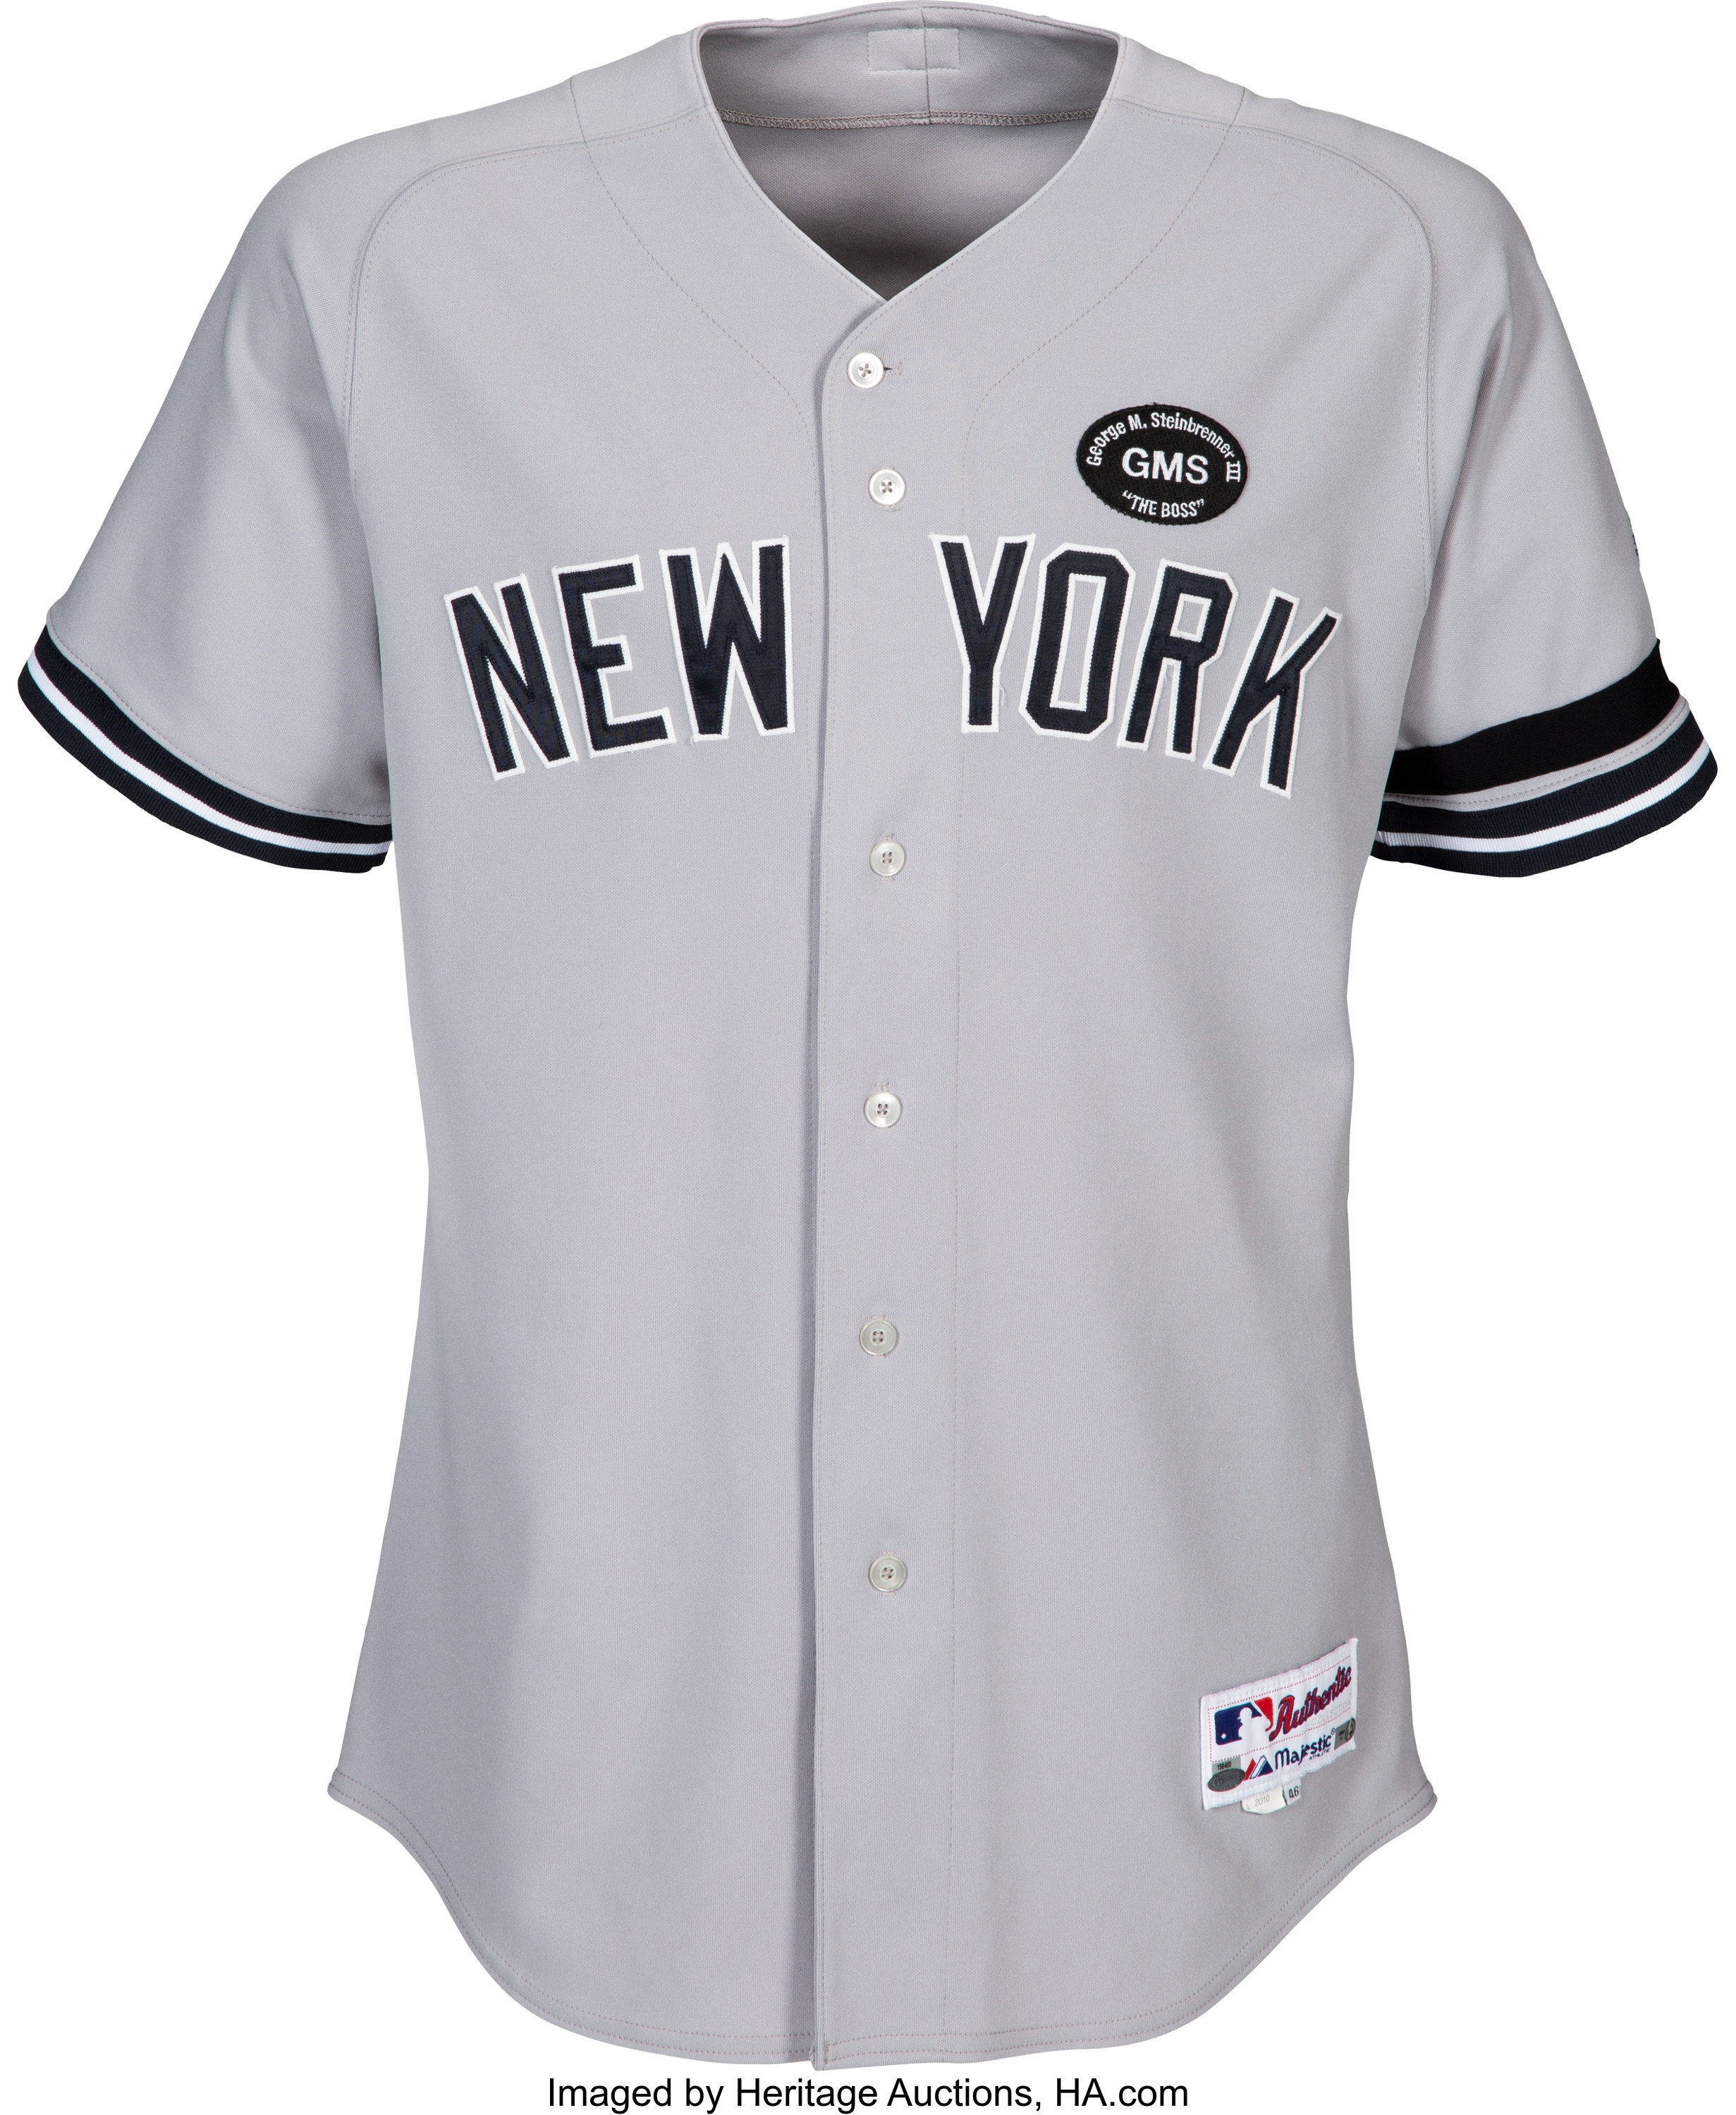 2010 NEW YORK YANKEES 2009 WS CHAMPS OFFICIAL MLB JERSEY PATCH